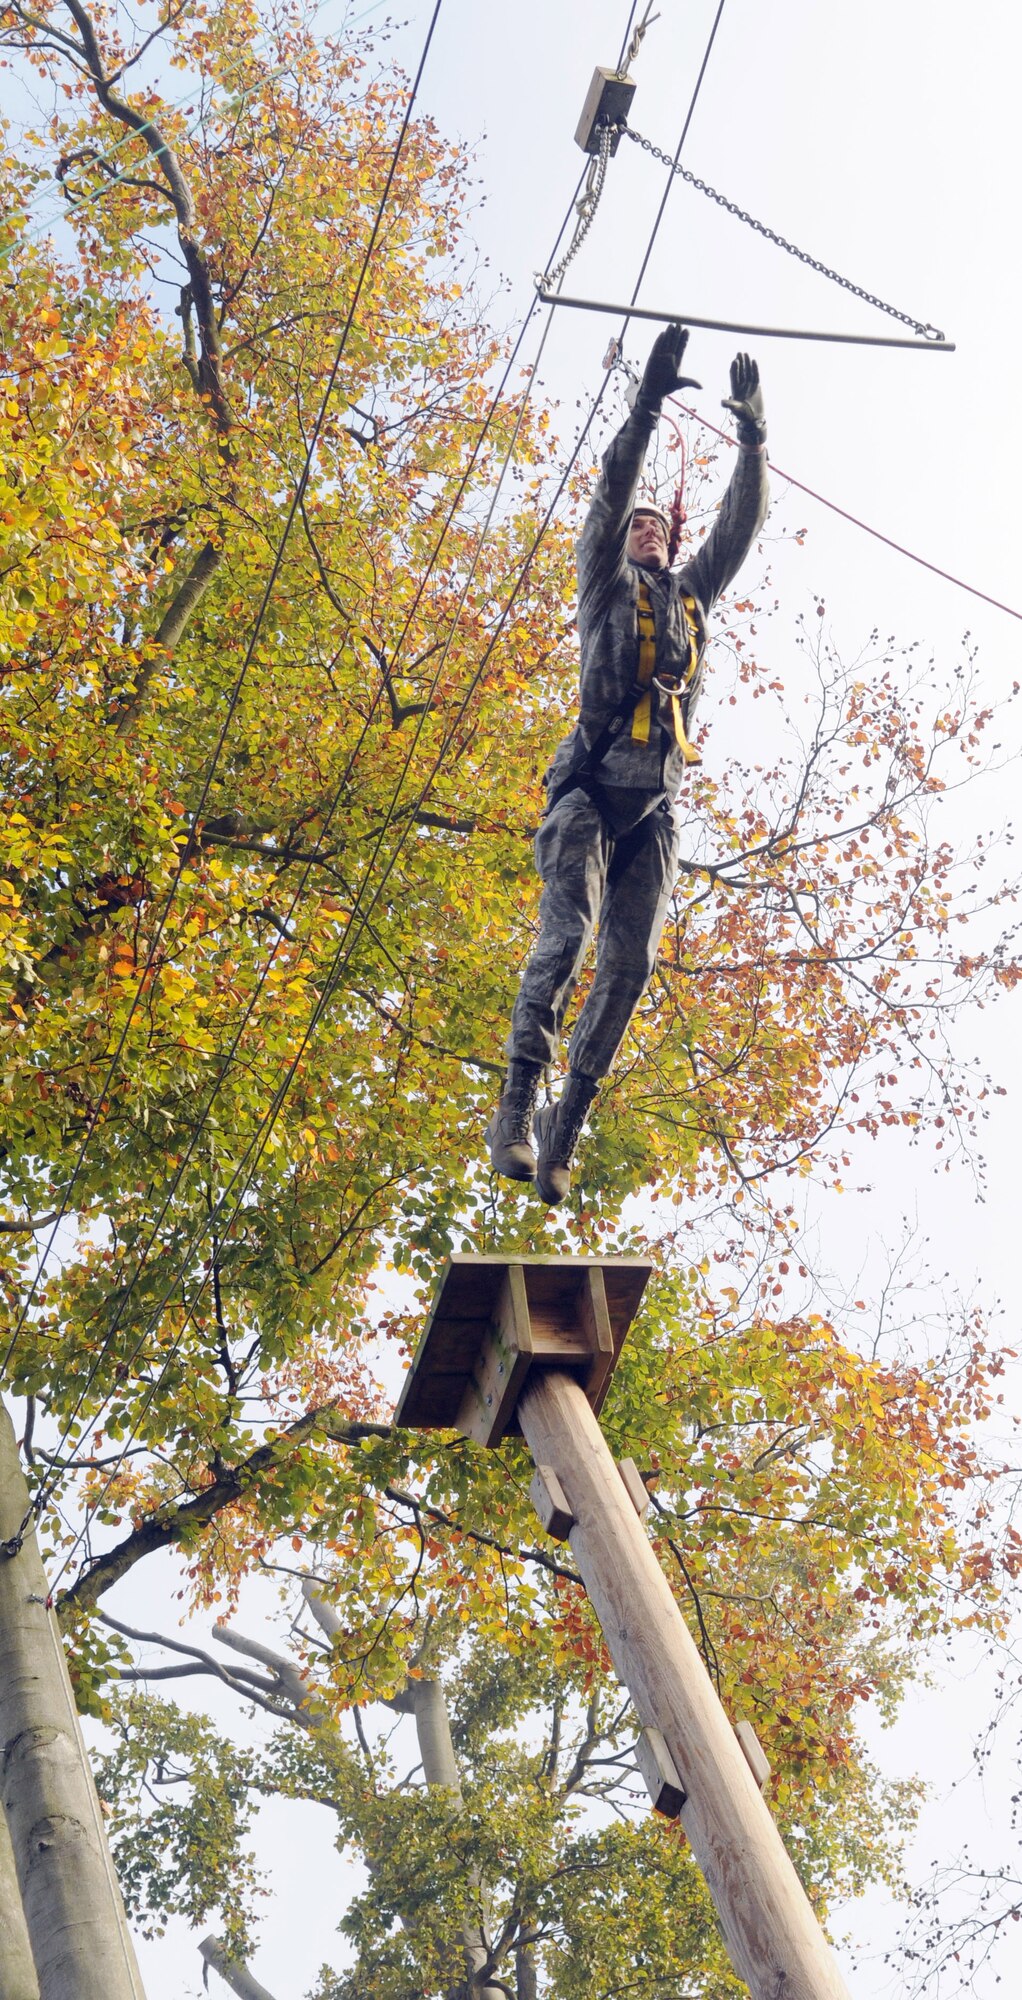 RAF MILDENHALL, England -- In a leap of faith, 1st Lt. Albert Secrest, 48th Equipment Maintenance Squadron, dives from a 50-foot tall platform to grab a bar on the high-ropes course at RAF Marham Nov. 9. This event was one of 40 offered at the camp's Leadership, Ethos and Air Power Day to help build teamwork and leadership skills for American and British Air Forces. Forty Airmen from RAFs Mildenhall and Lakenheath participated in the event. (U.S. Air Force photo/Senior Airman Thomas Trower)